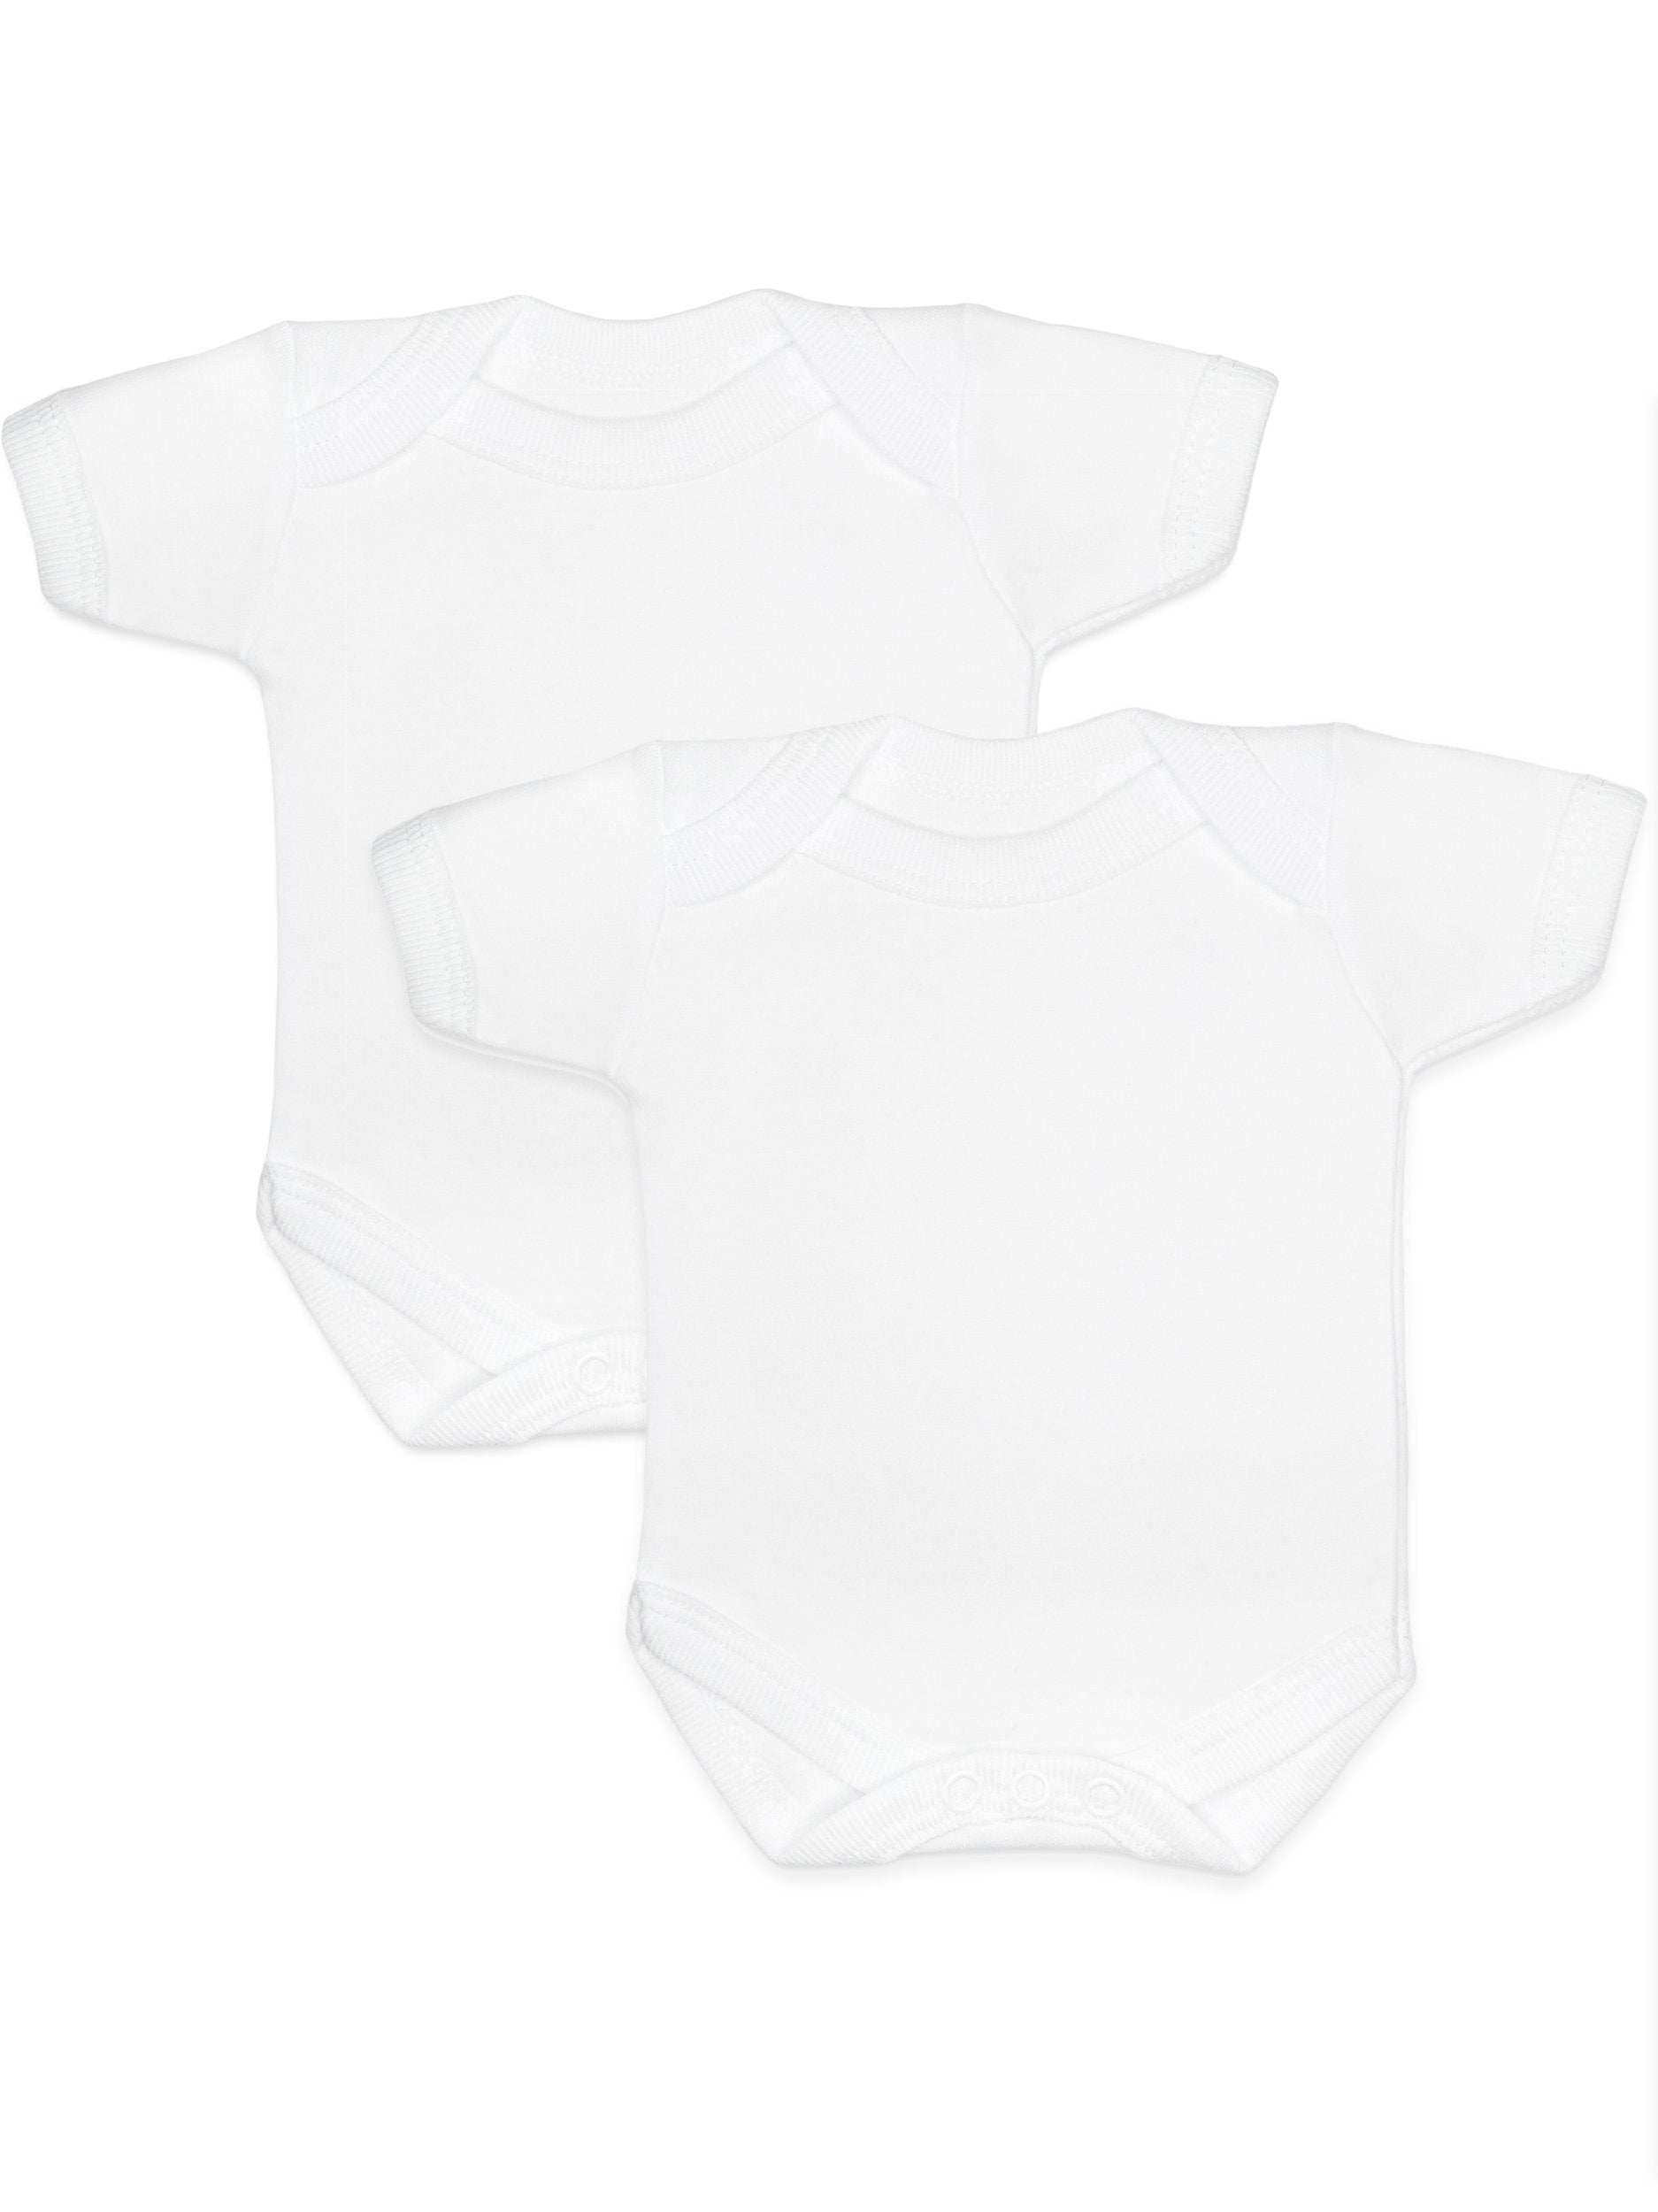 2 Pack - 100% Cotton White Short Sleeved Bodysuits (Early Baby, 3-5lb) - Bodysuit / Vest - Little Mouse Baby Clothing & Gifts